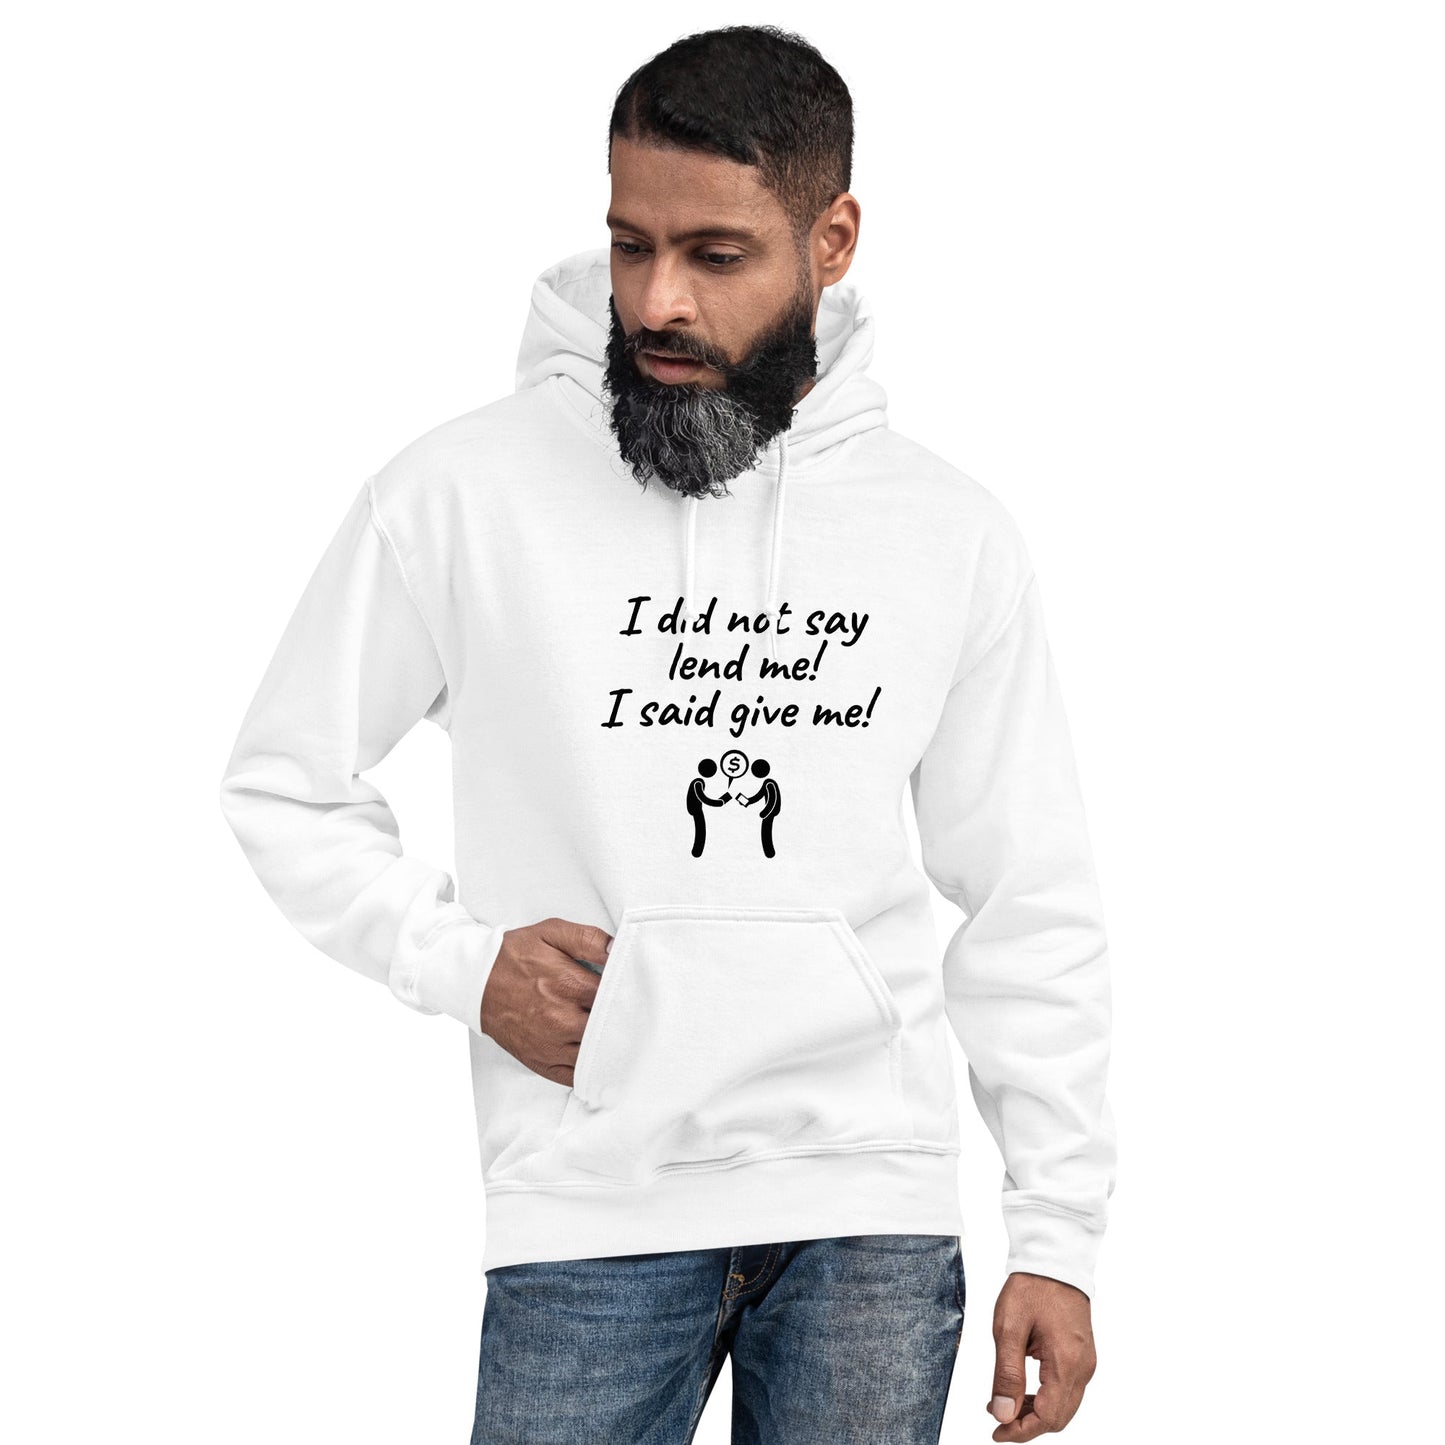 I DID NOT SAY LEND ME HOODIE-Hoodie-White-S-mysticalcherry